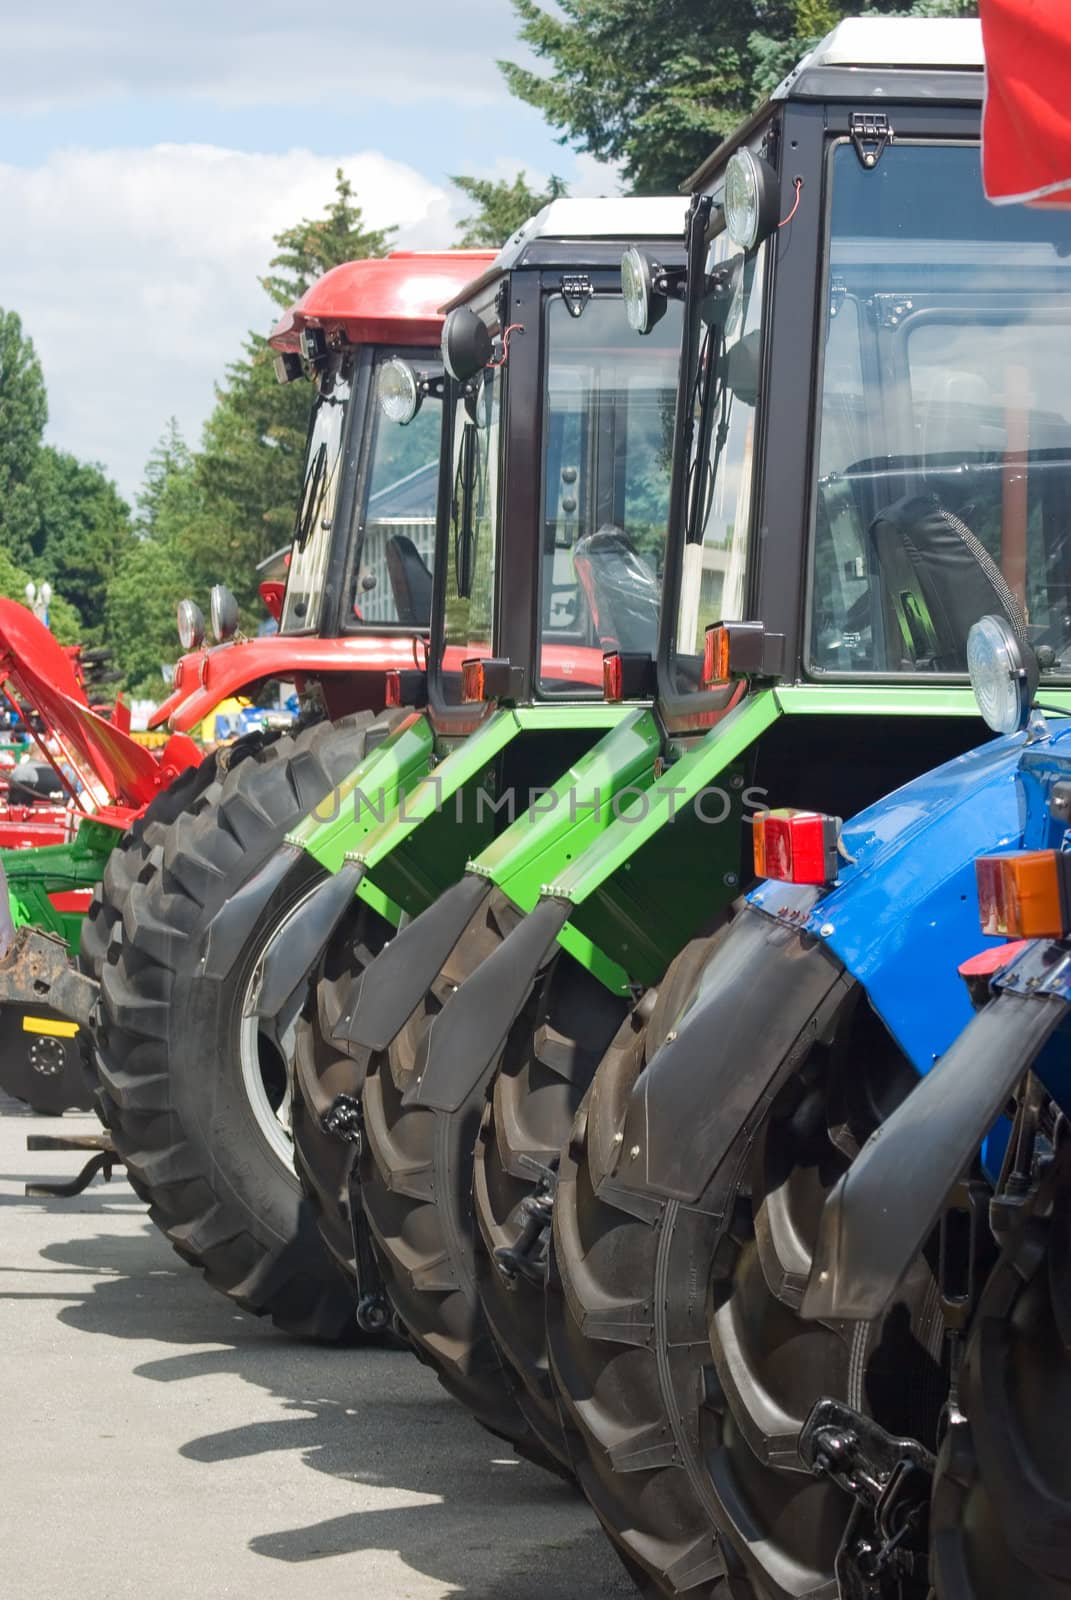 
new tractors standing in a row, ready to work